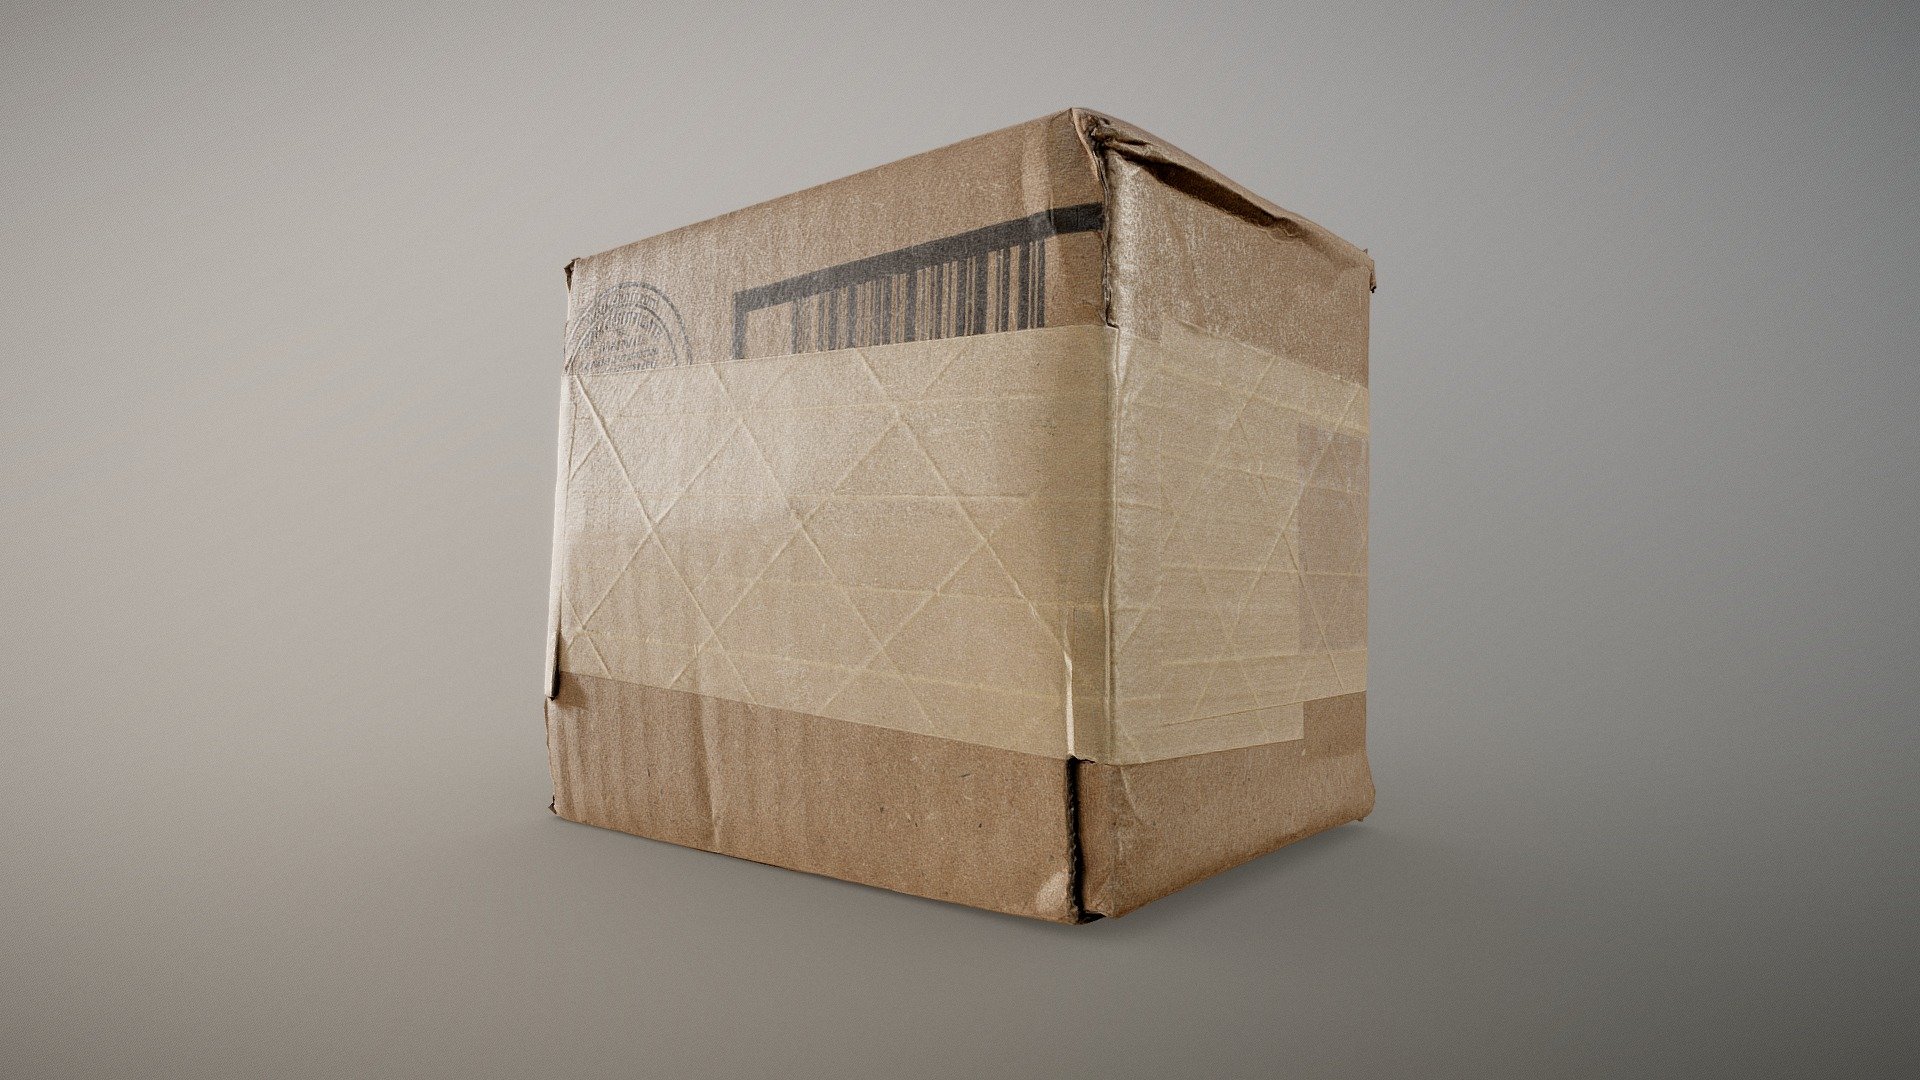 Brown Package Box 

12.4 x 16.2 x 13.5 cm (100 micrometers per texel @ 4k)

Scanned using advanced technology developed by inciprocal Inc. that enables highly photo-realistic reproduction of real-world products in virtual environments. Our hardware and software technology combines advanced photometry, structured light, photogrammtery and light fields to capture and generate accurate material representations from tens of thousands of images targeting real-time and offline path-traced PBR compatible renderers.

Zip file includes low-poly OBJ mesh (in meters) with a set of 4k PBR textures compressed with lossless JPEG (no chroma sub-sampling) 3d model